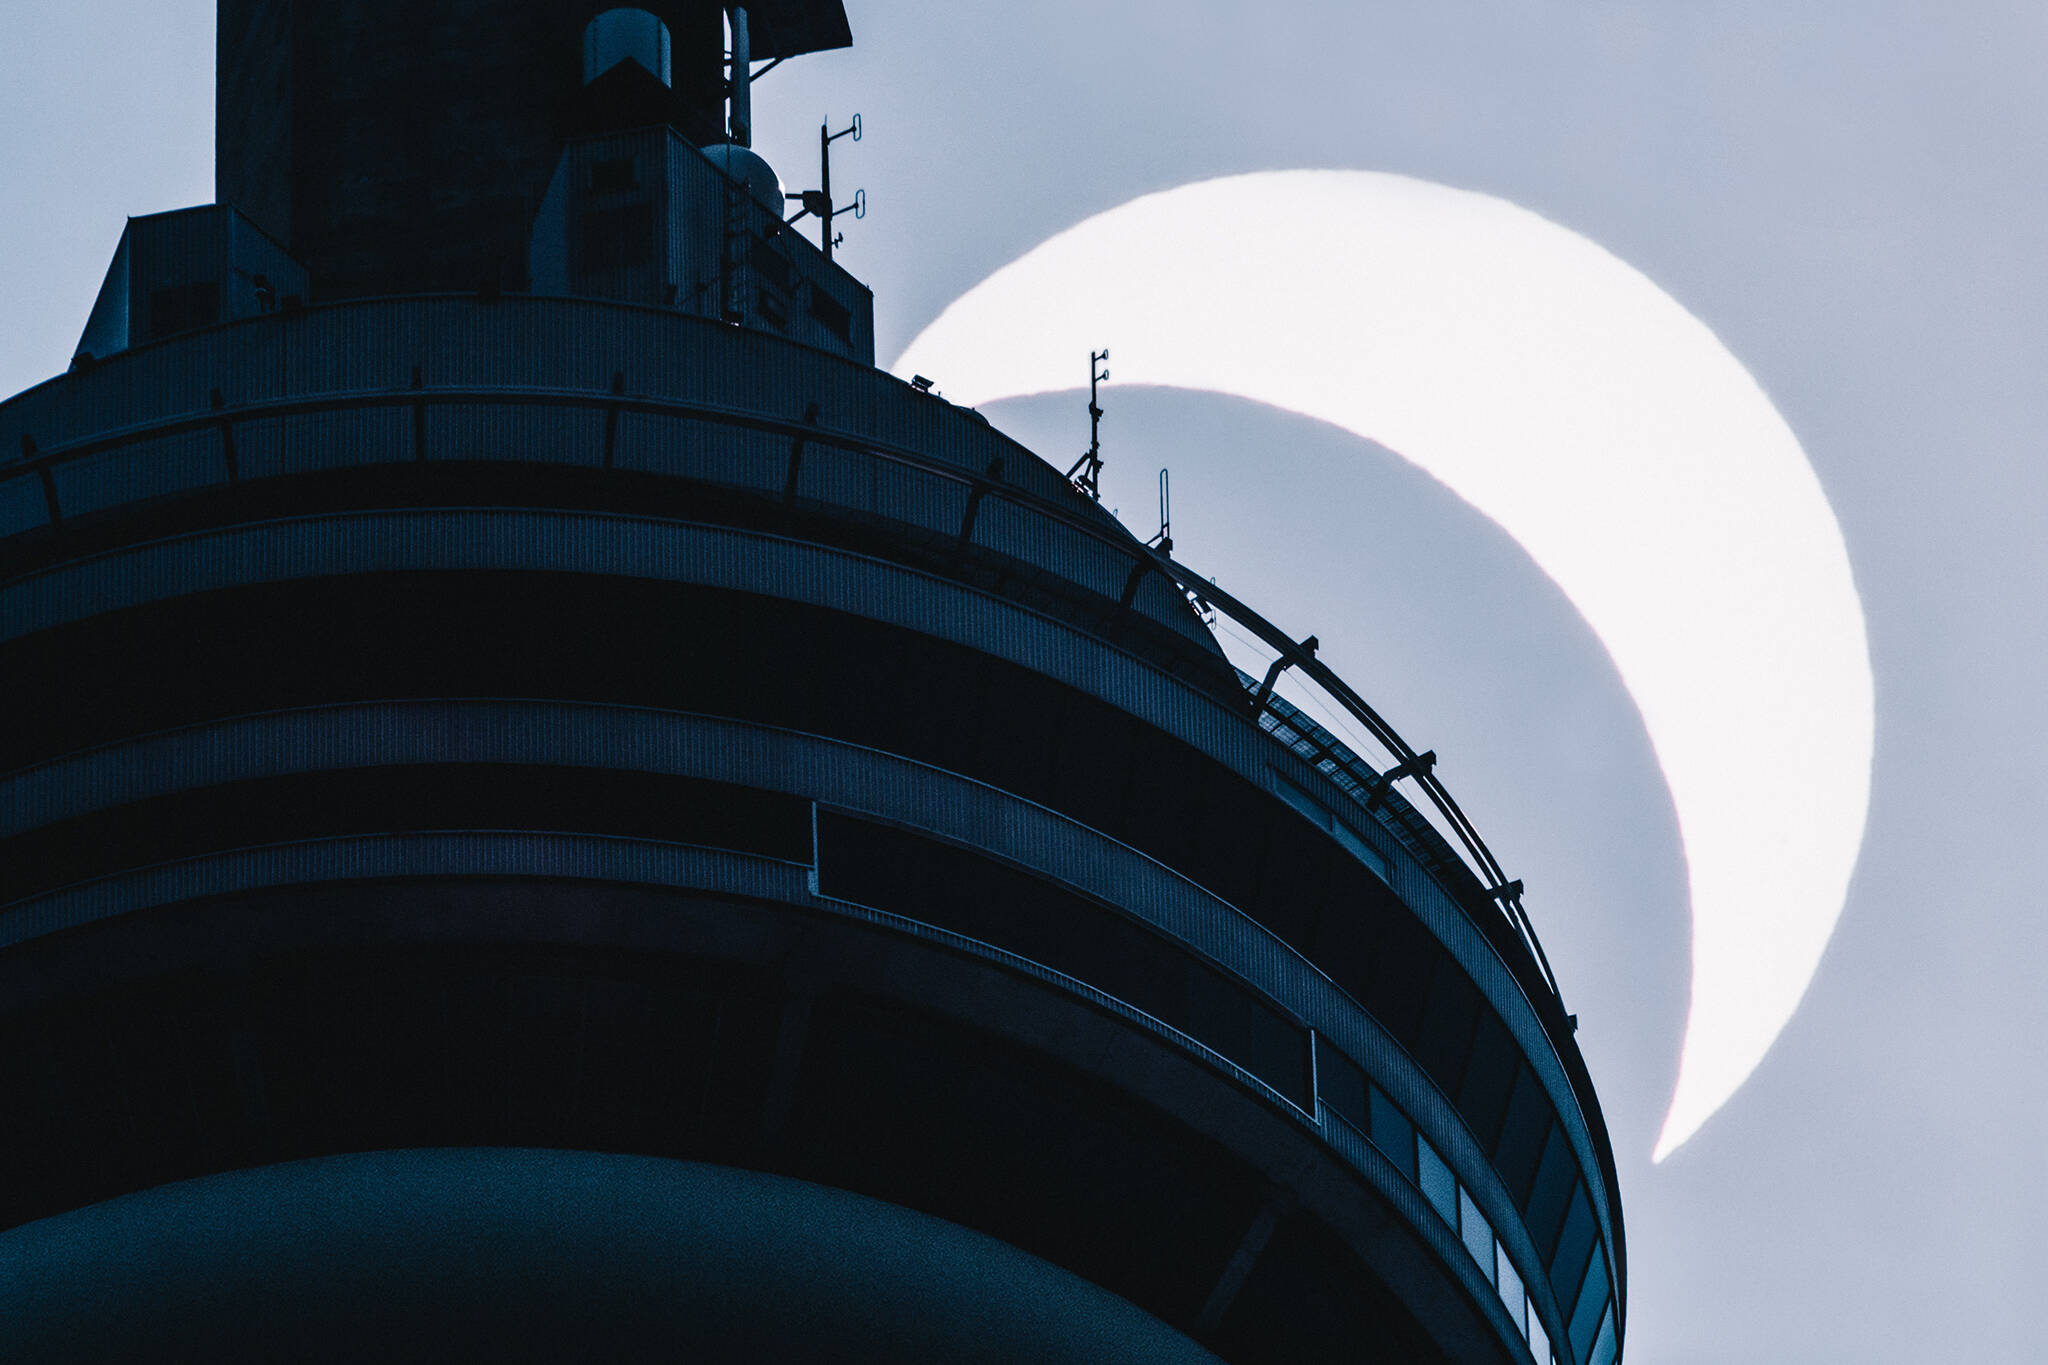 Someone captured the solar eclipse passing the CN Tower